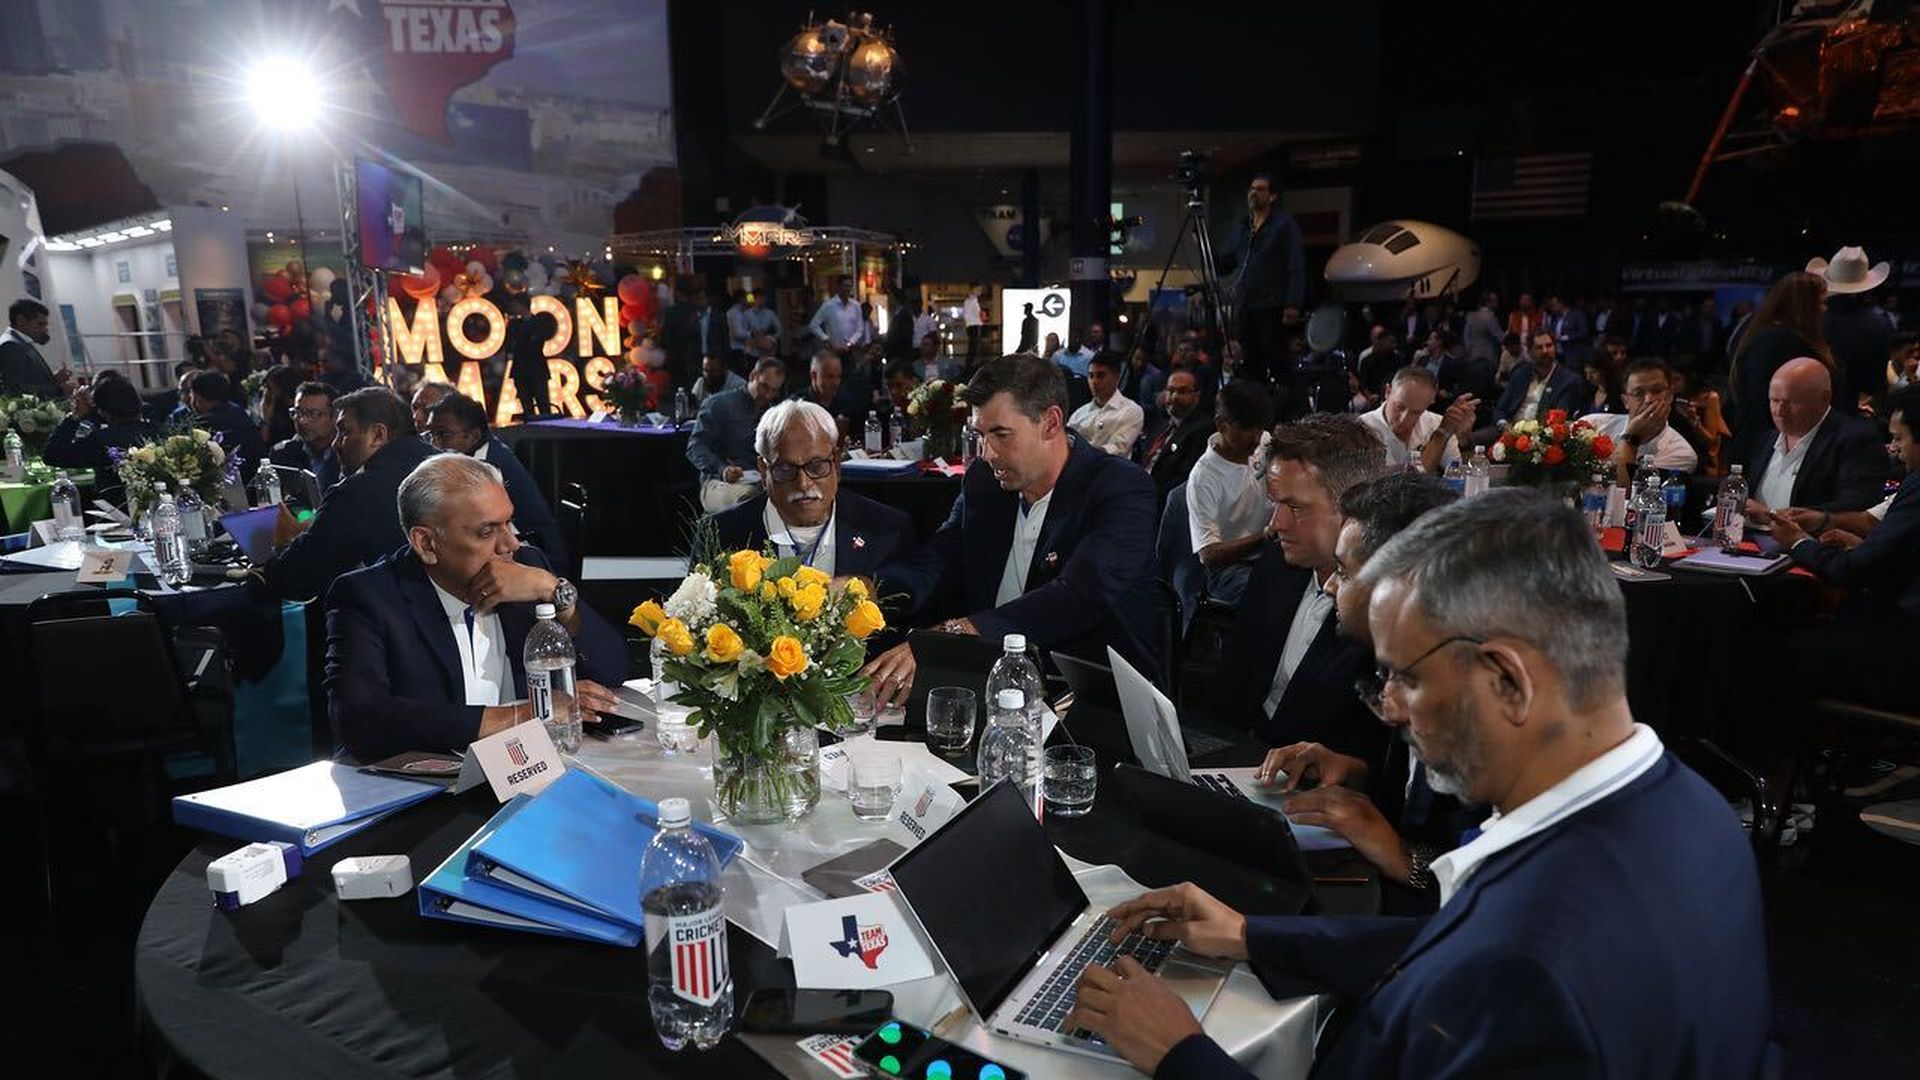 Men in nice suits sit around a table, looking thoughtful. Some have computers, some have papers.